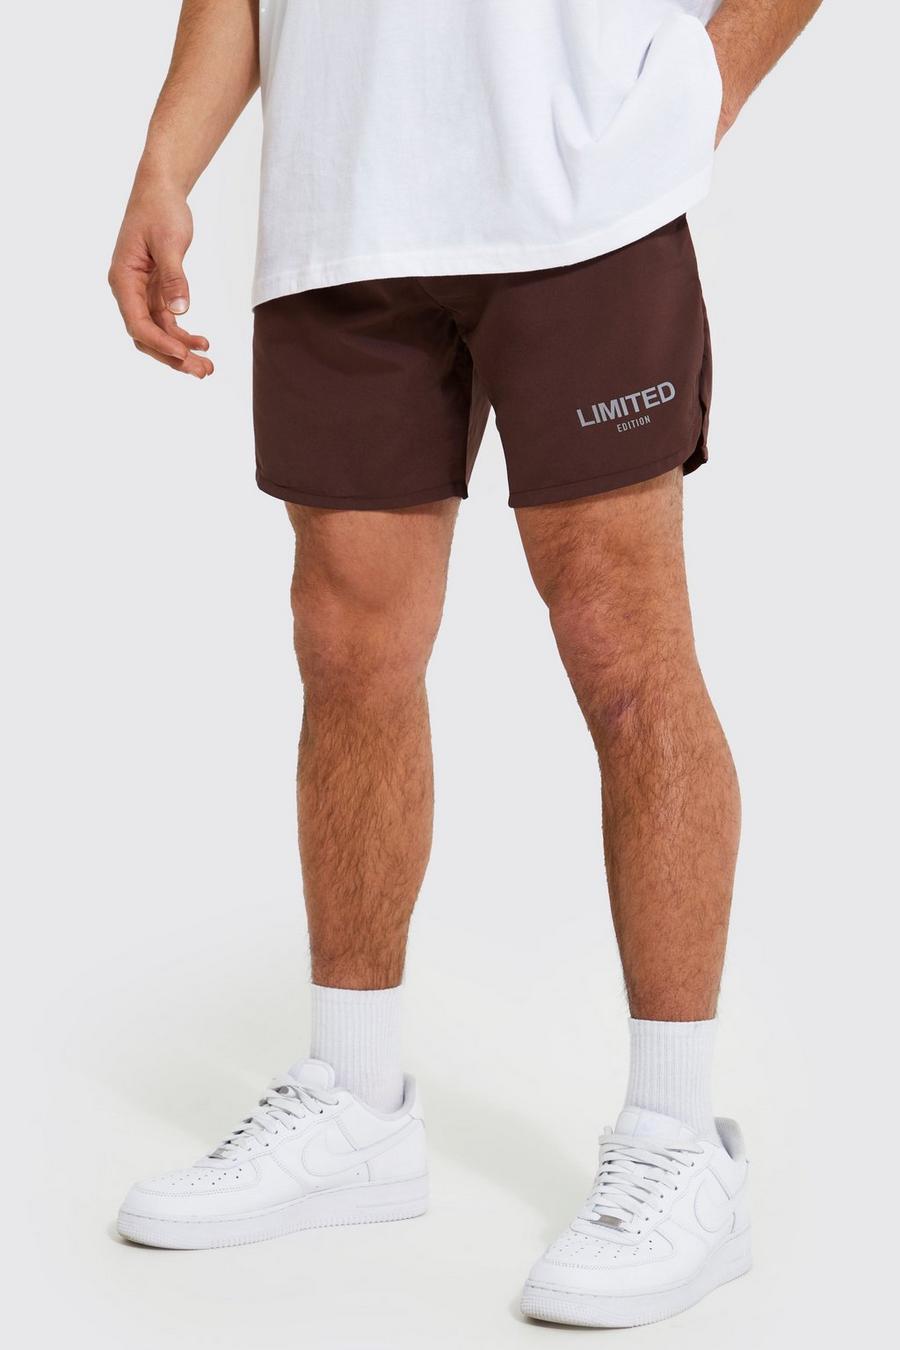 Chocolate braun Regular Fit Peached Shell Limited Shorts 